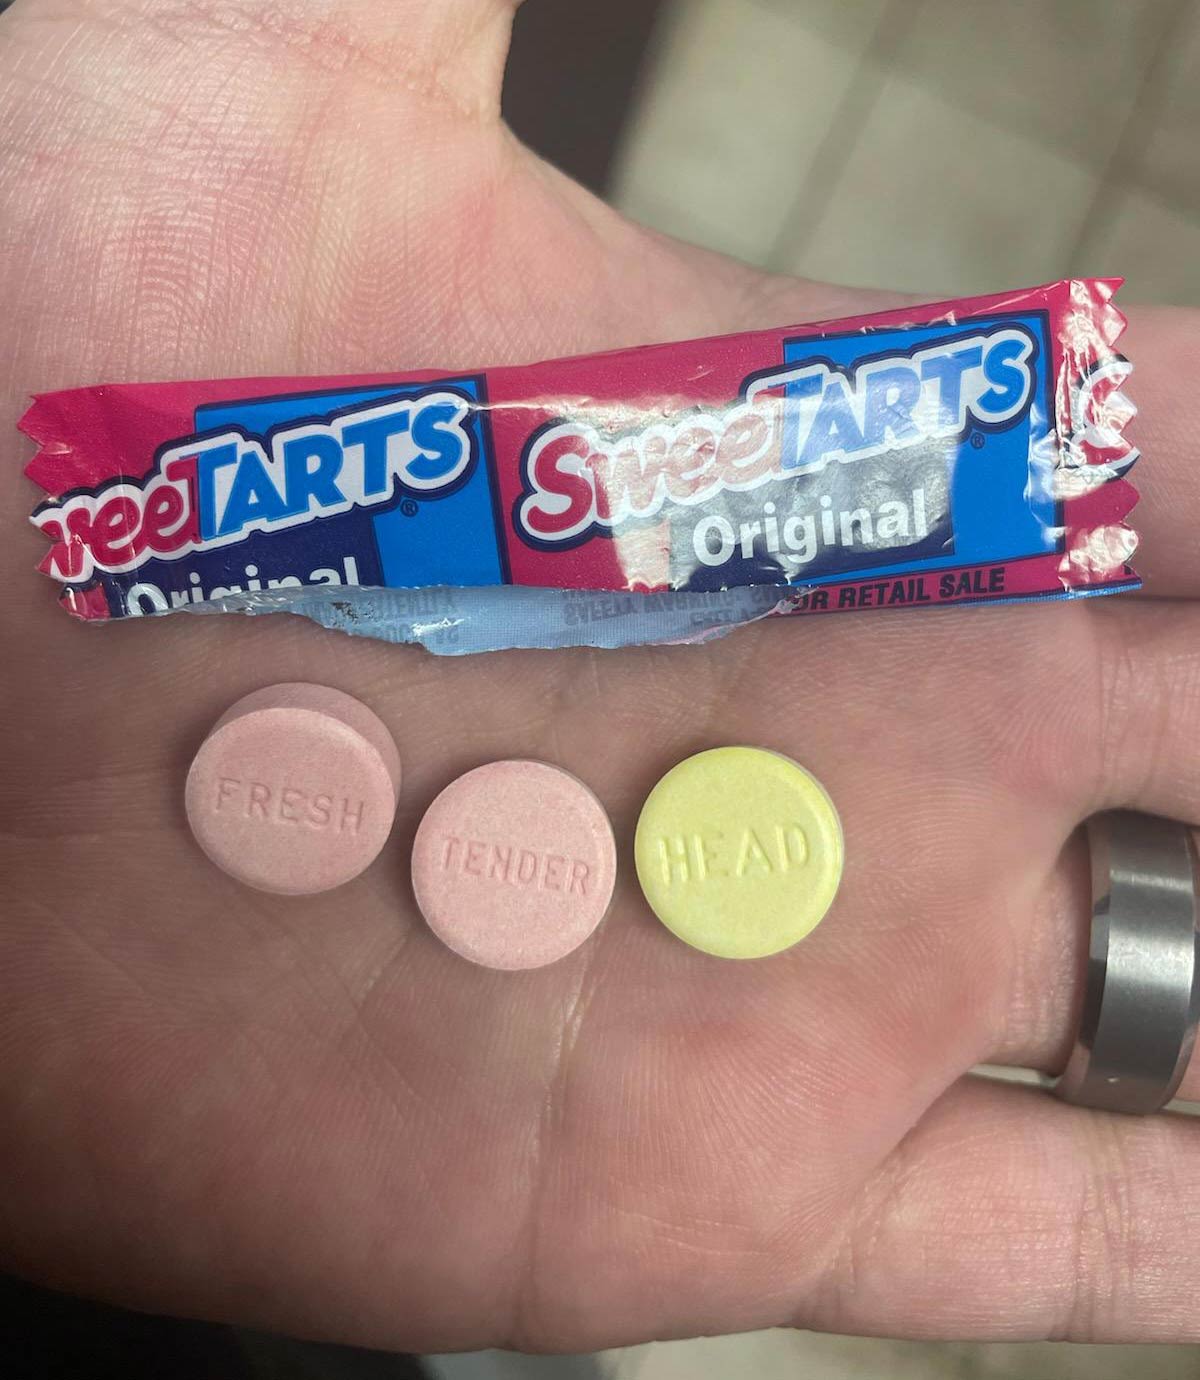 How did Sweet tarts know what I want for my birthday?